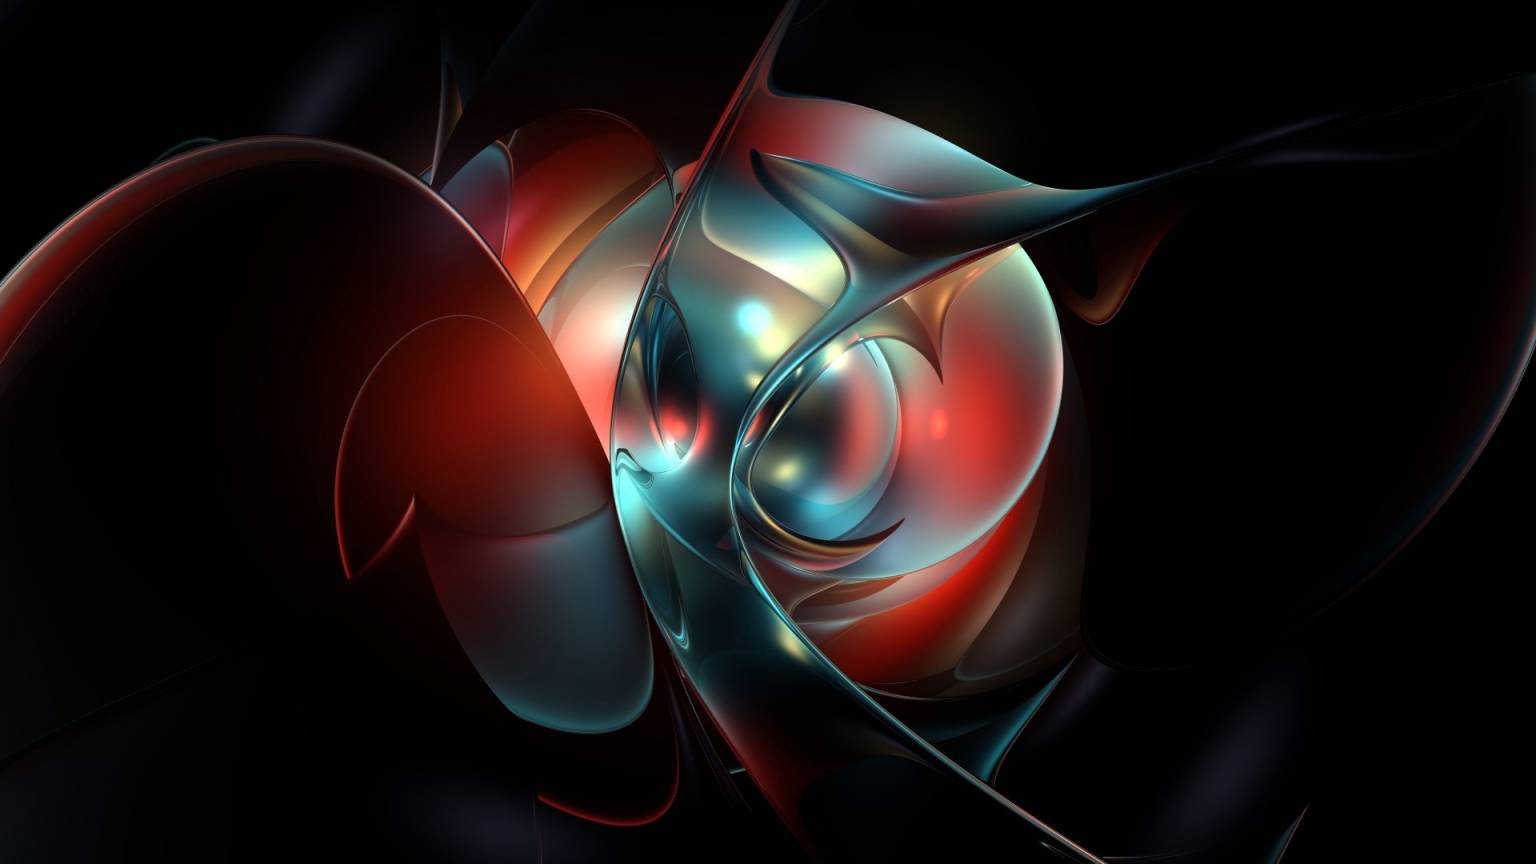 Abstract Geometric Shapes for 1536 x 864 HDTV resolution